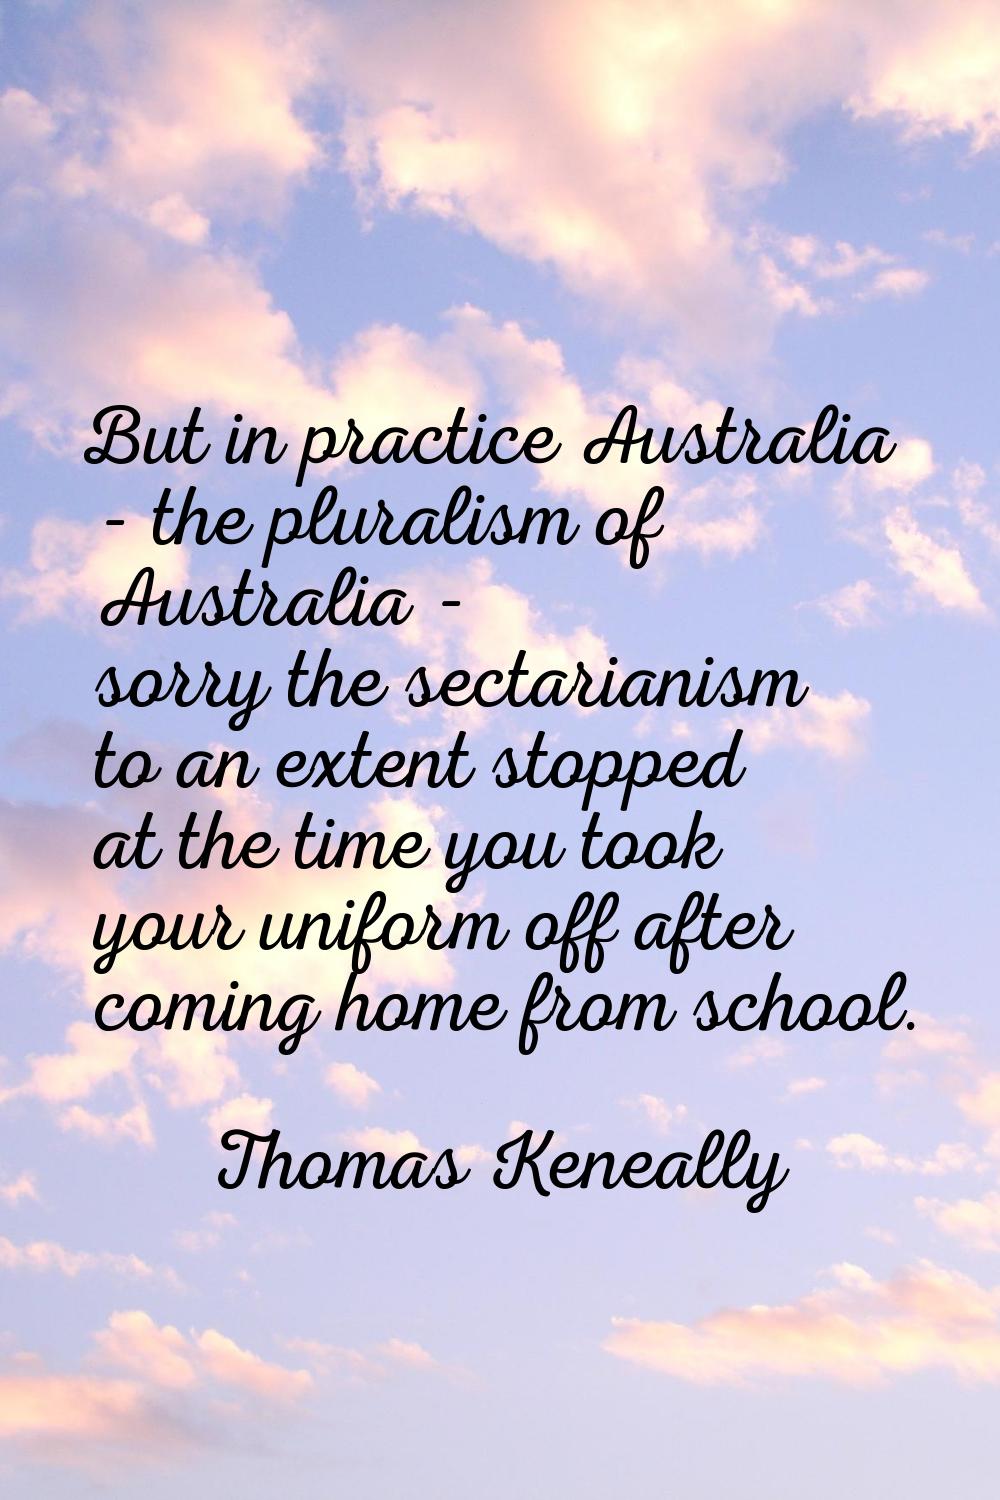 But in practice Australia - the pluralism of Australia - sorry the sectarianism to an extent stoppe